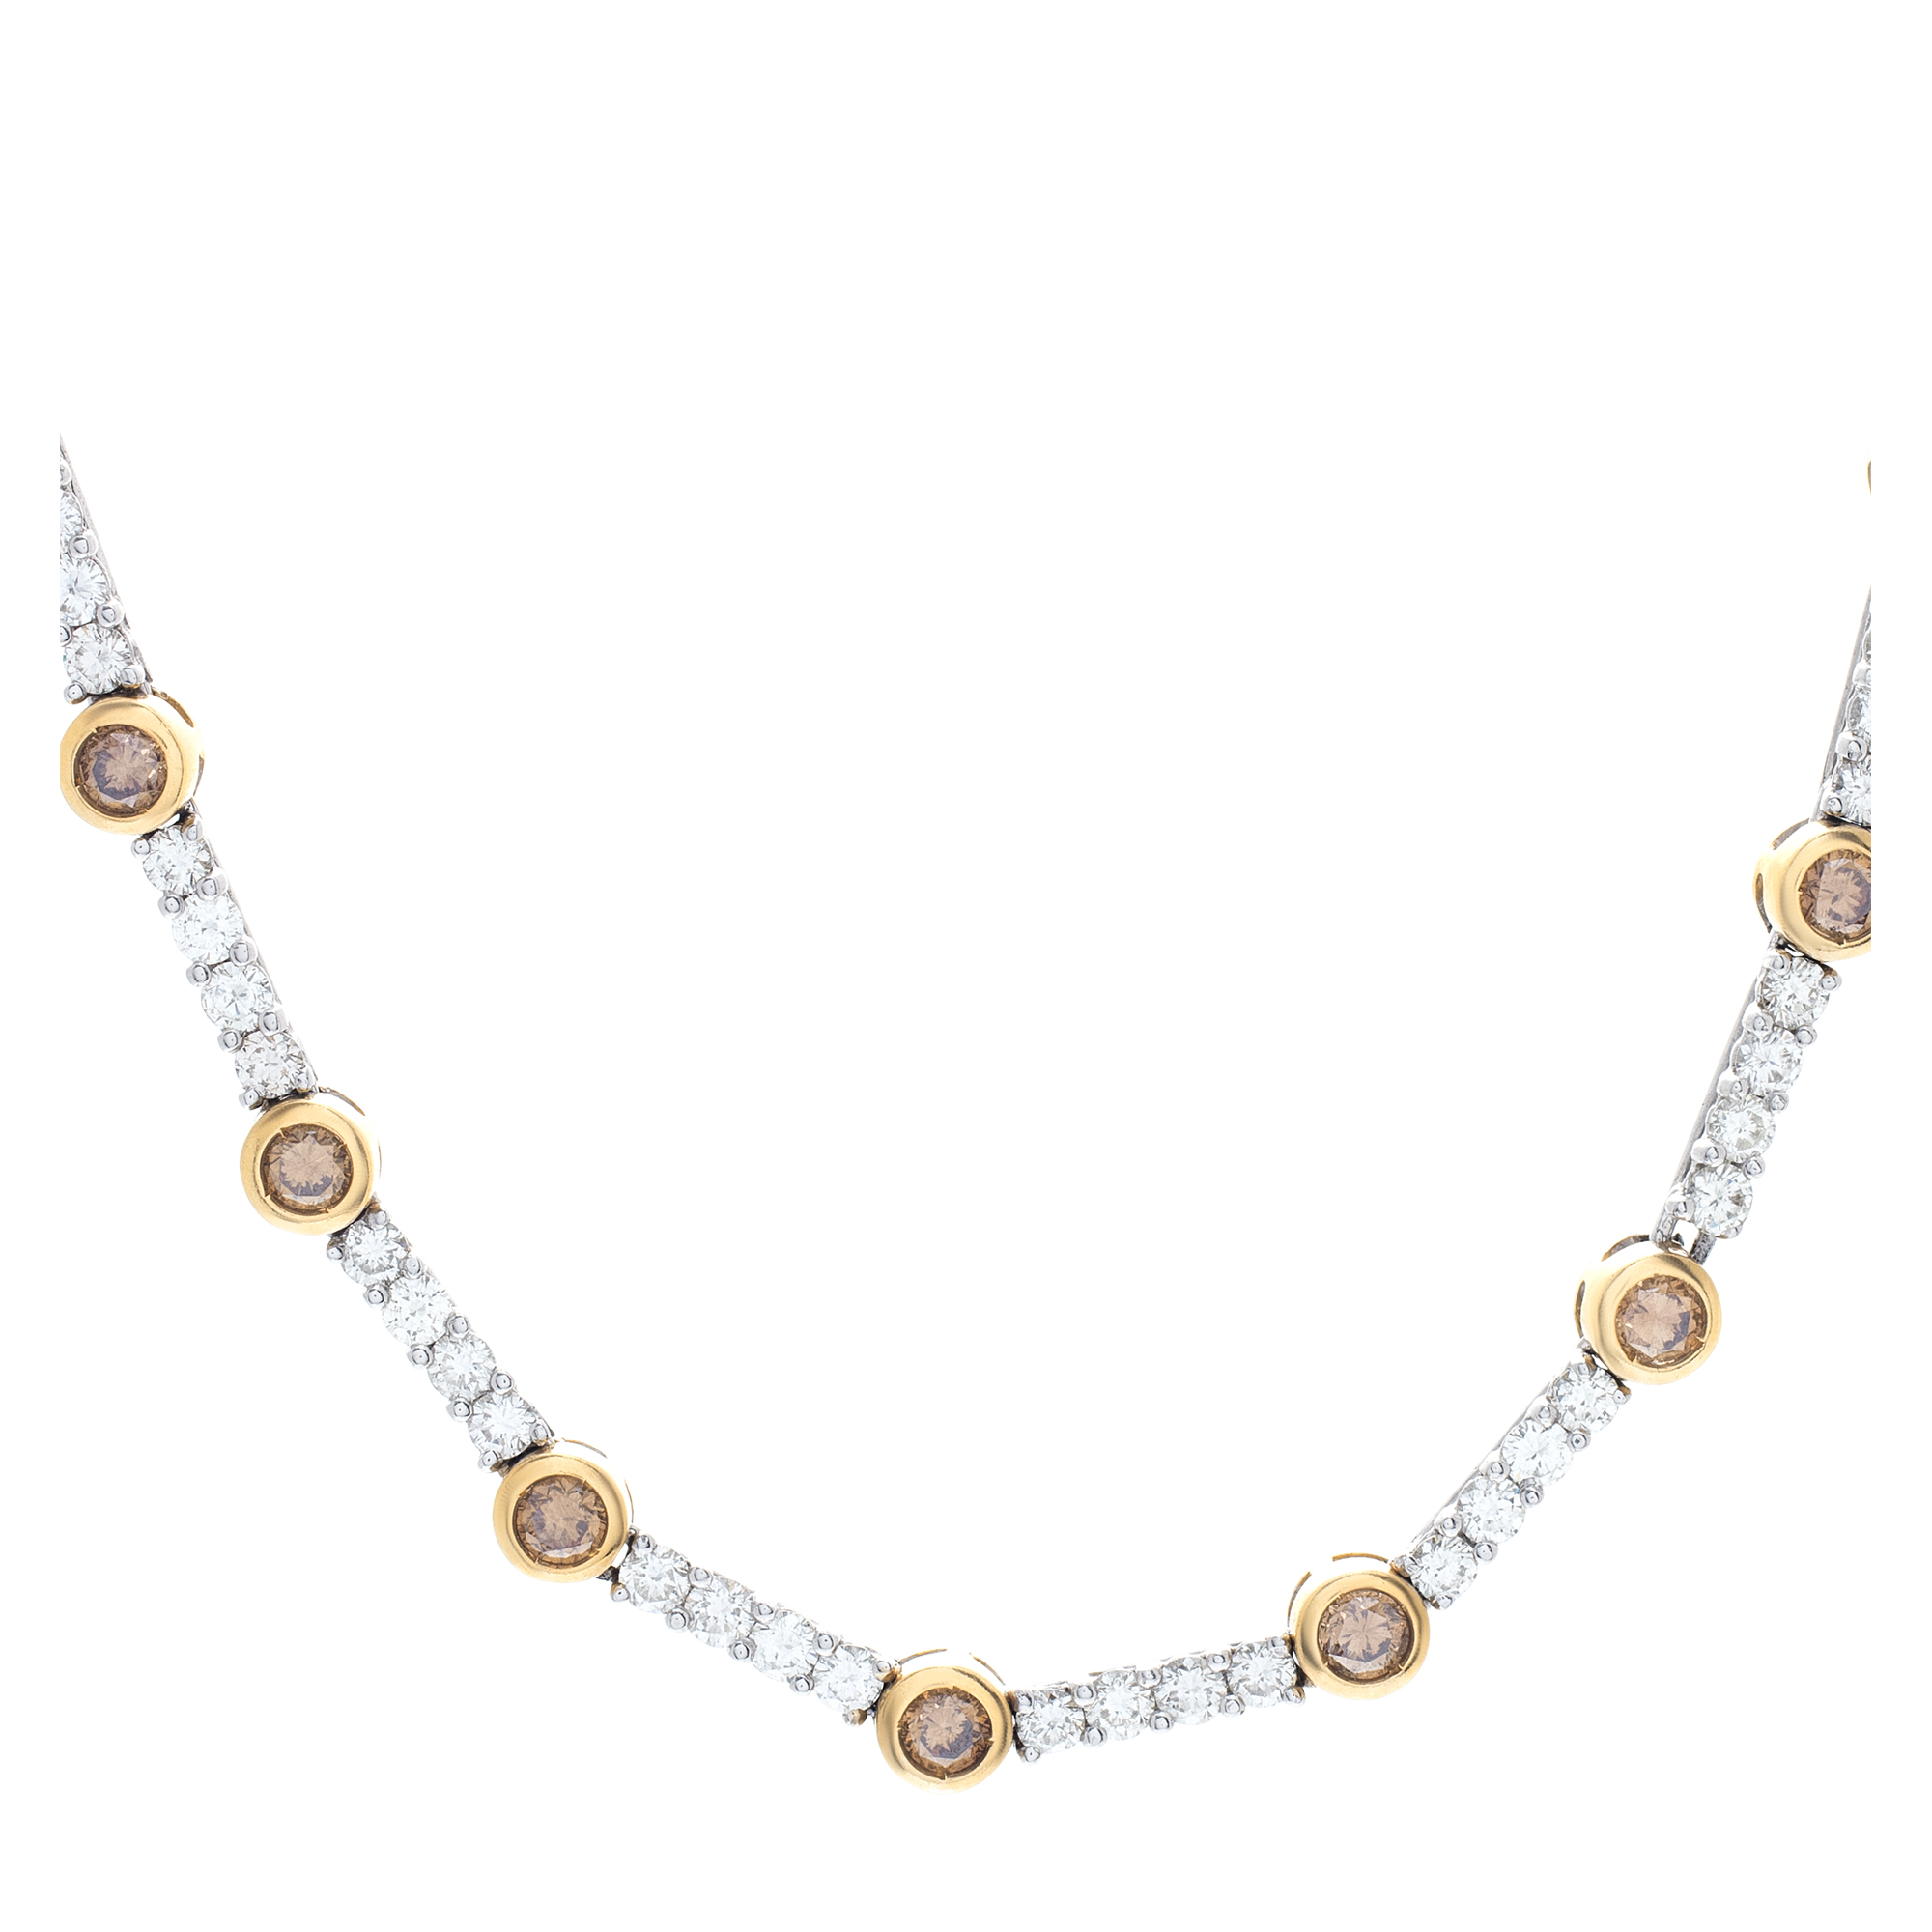 Stunning 18k white and yellow gold necklace with white and yellow diamonds image 2